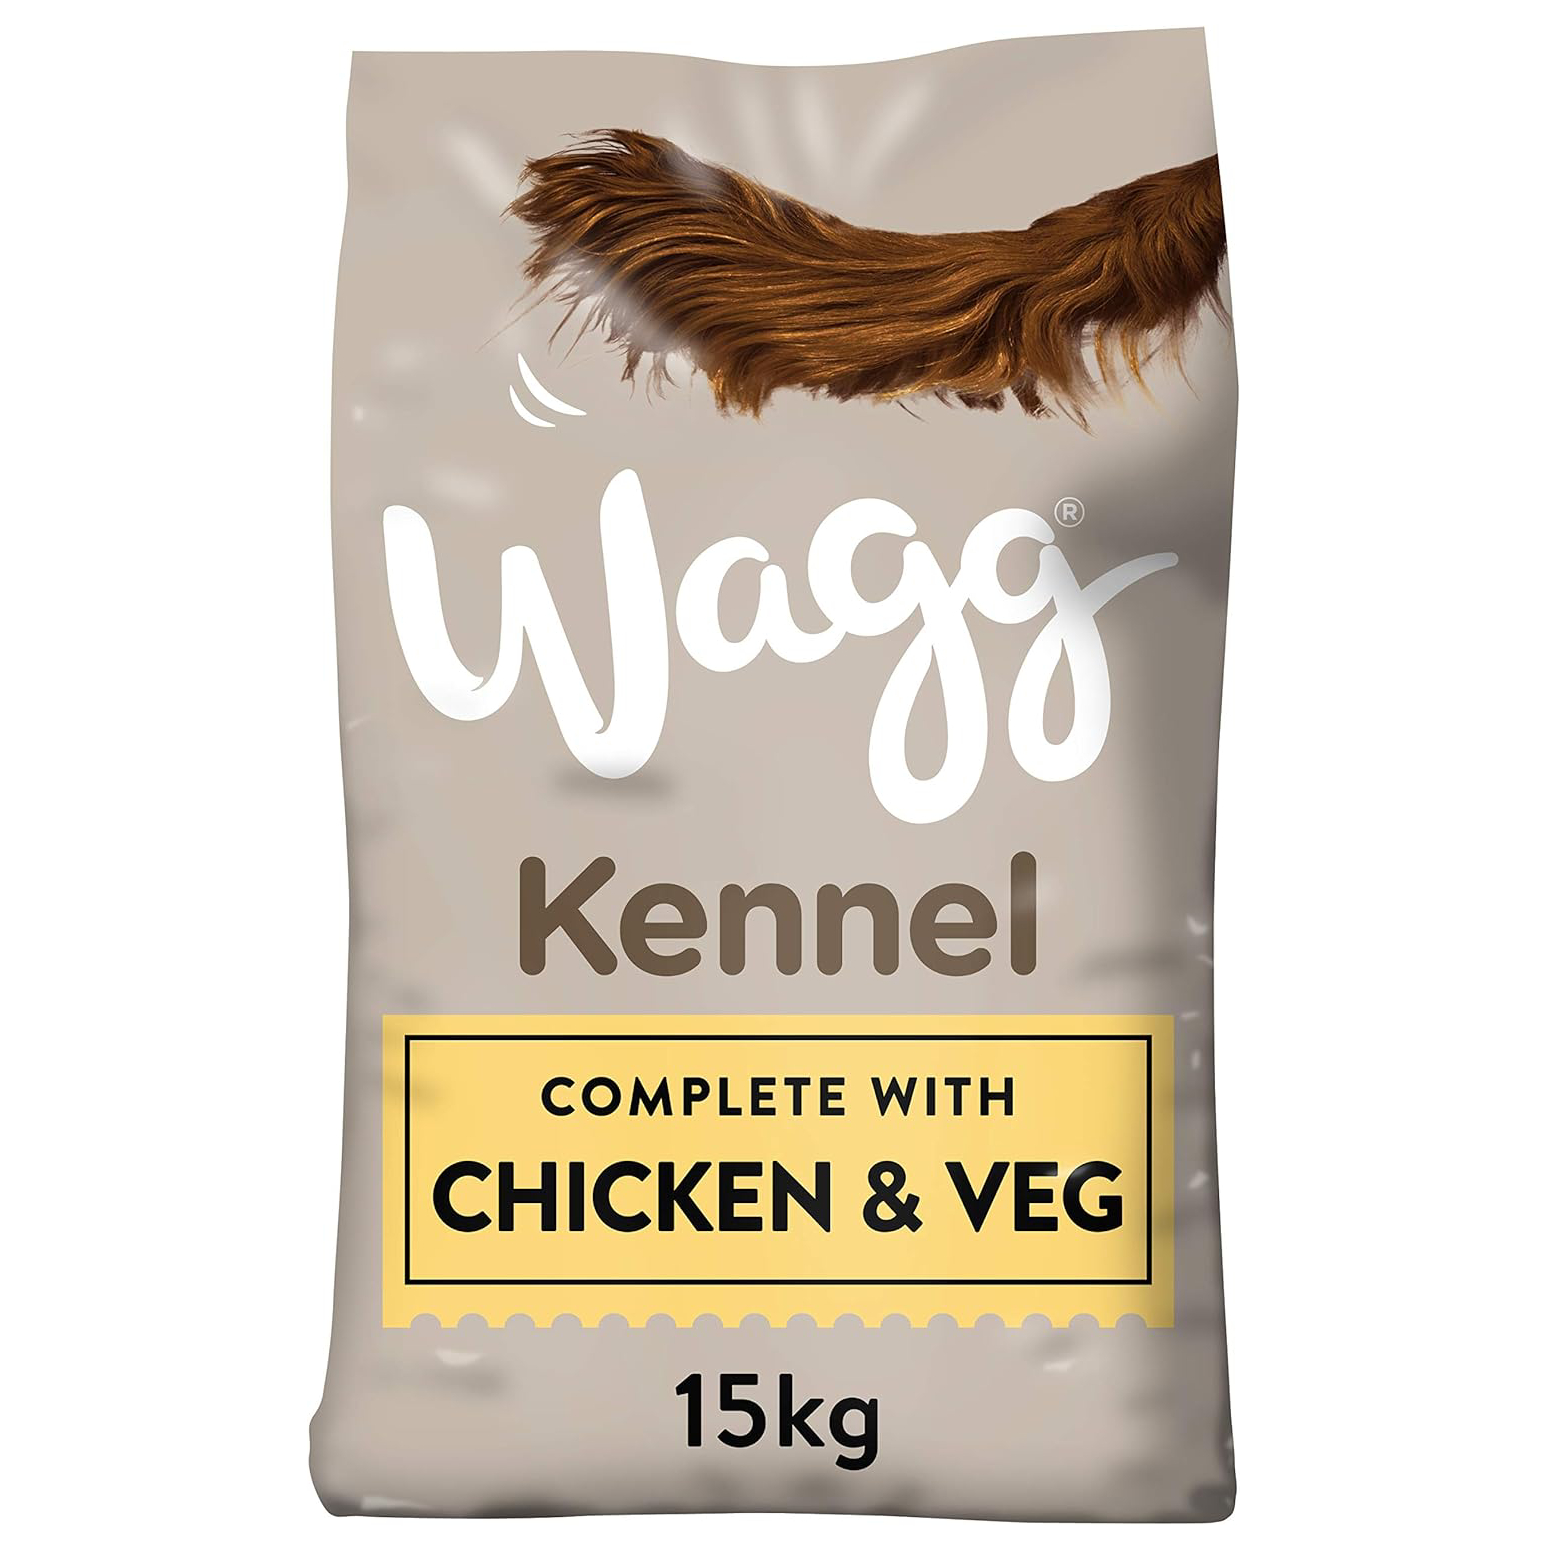 Wagg Complete Kennel Chicken Dry Dog Food